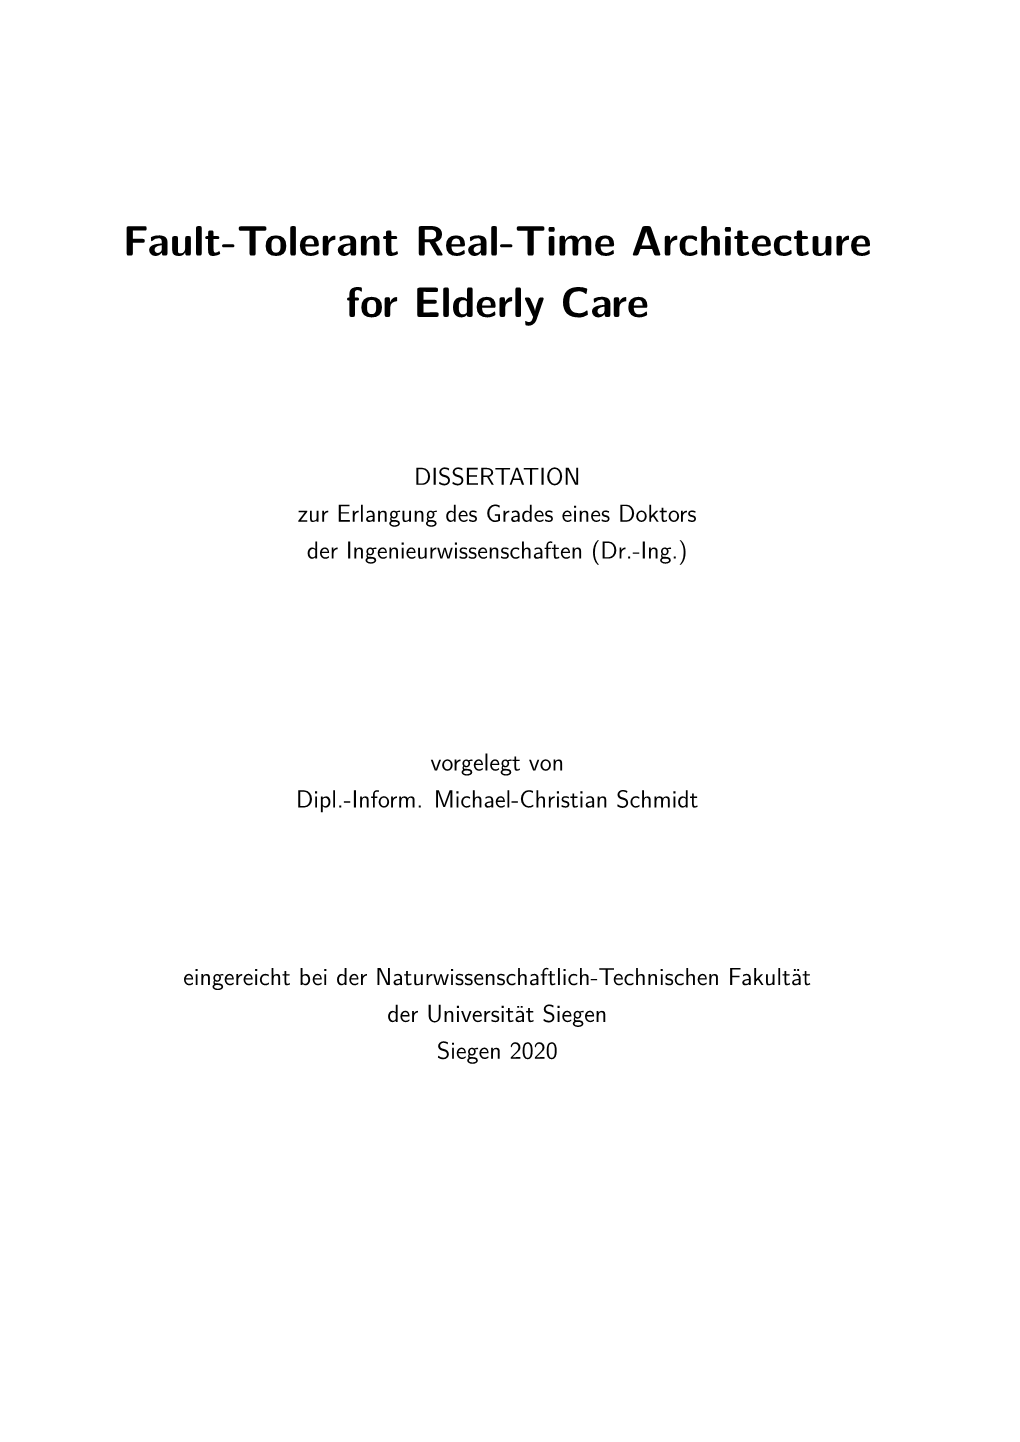 Fault-Tolerant Real-Time Architecture for Elderly Care